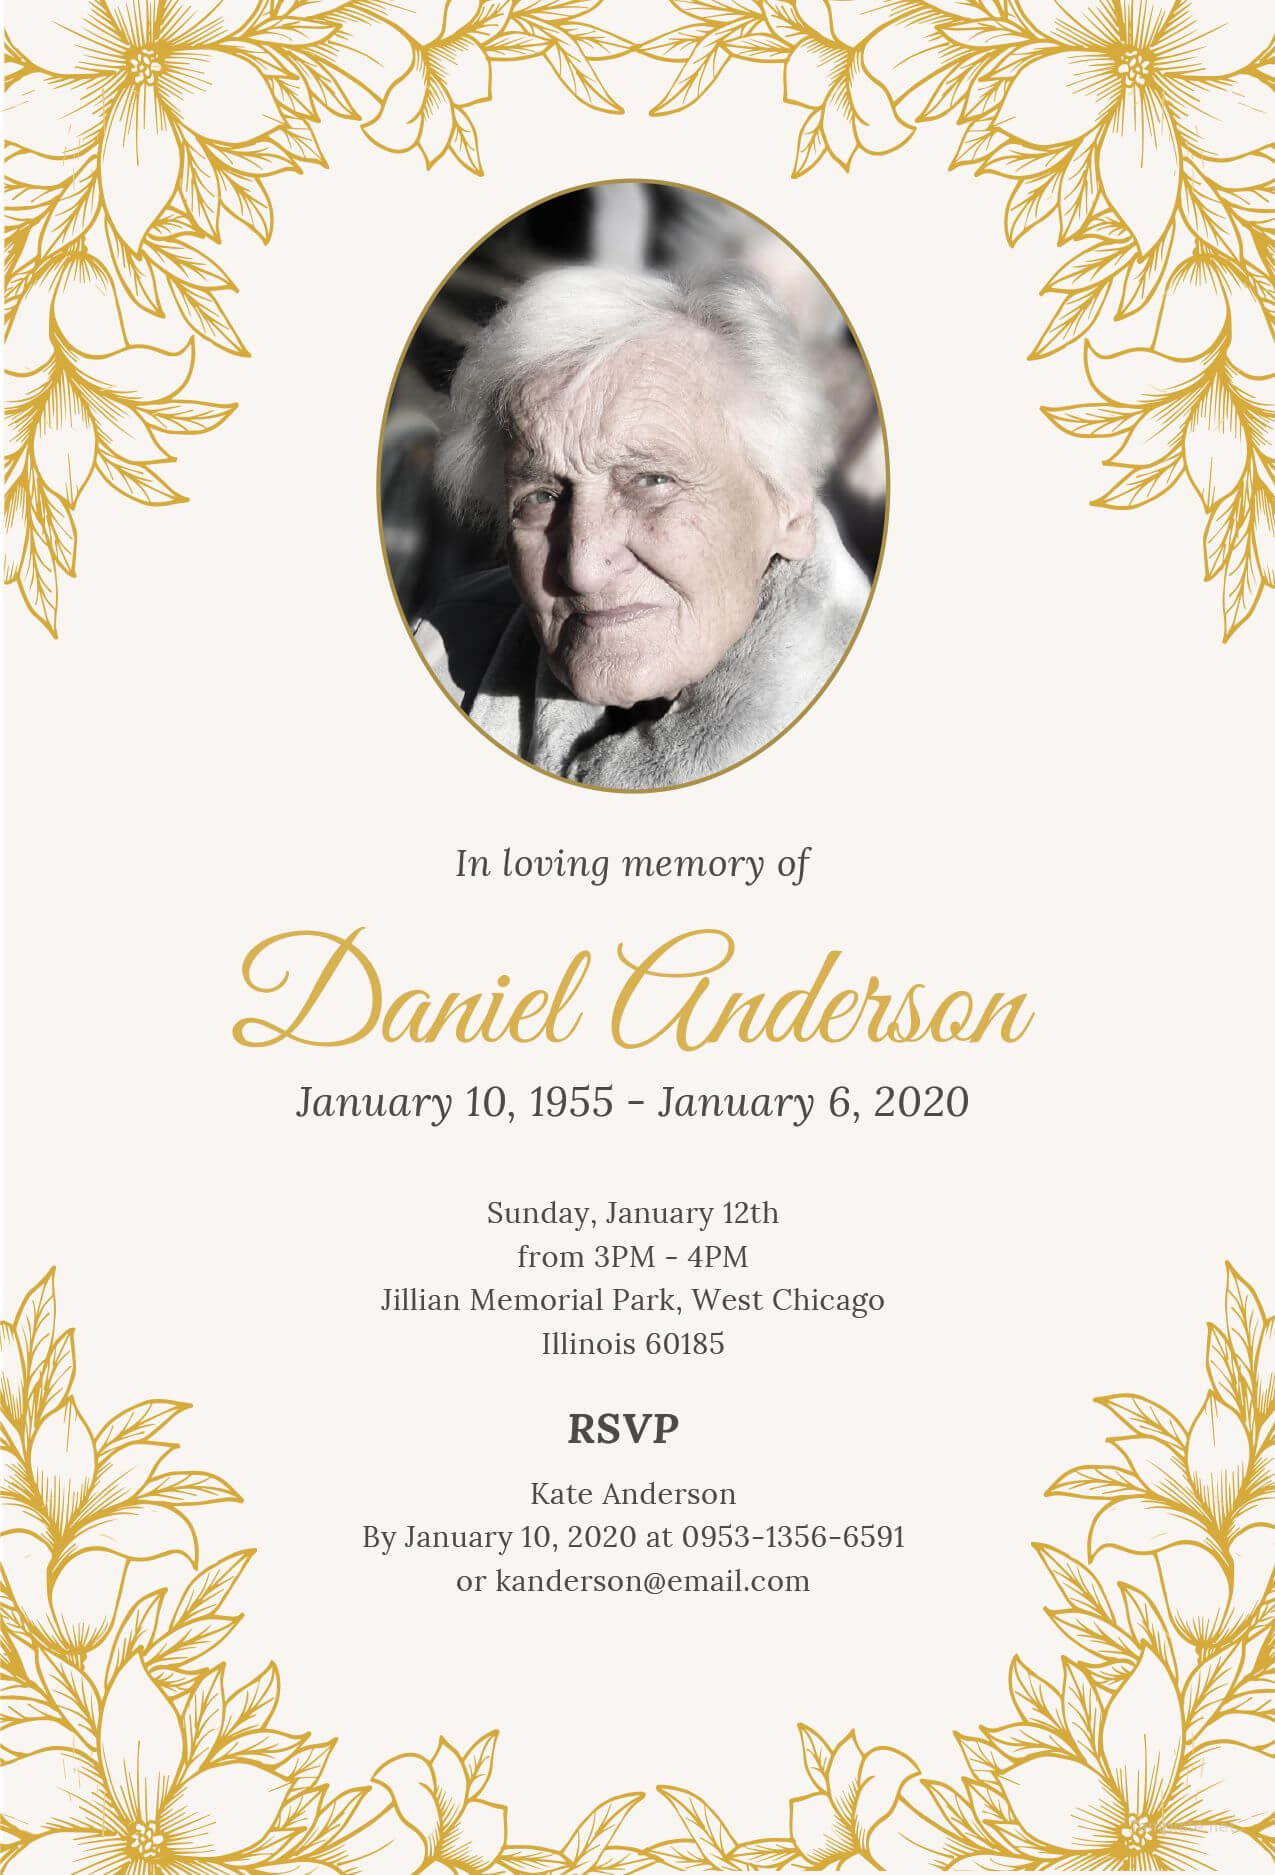 Free Funeral Ceremony Invitation | Funeral Invitation Throughout Funeral Invitation Card Template